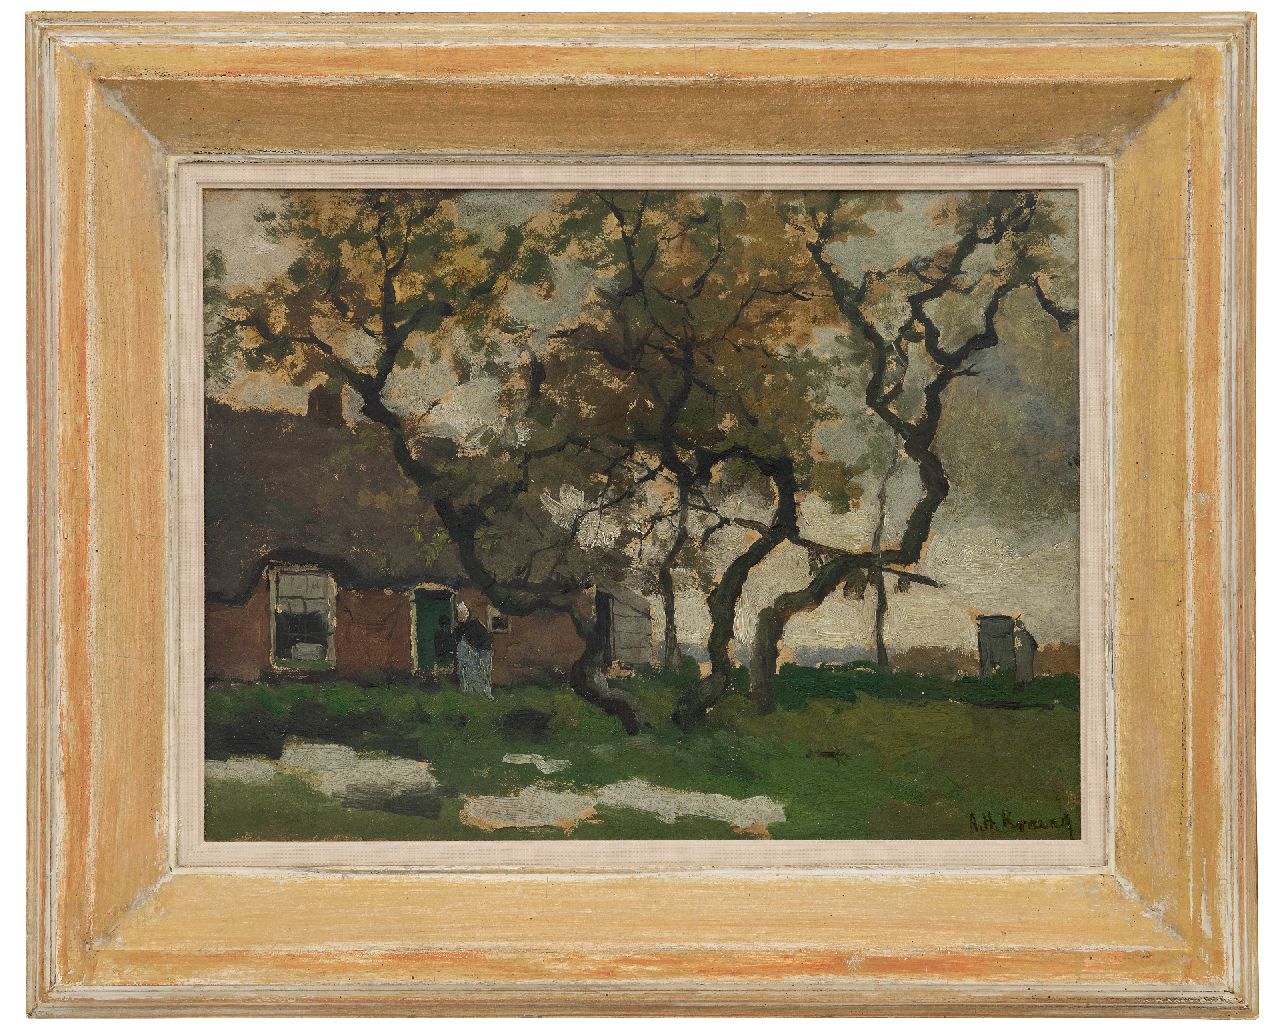 Koning A.H.  | 'Arnold' Hendrik Koning | Paintings offered for sale | Farmyard, oil on panel 31.4 x 41.7 cm, signed l.r.